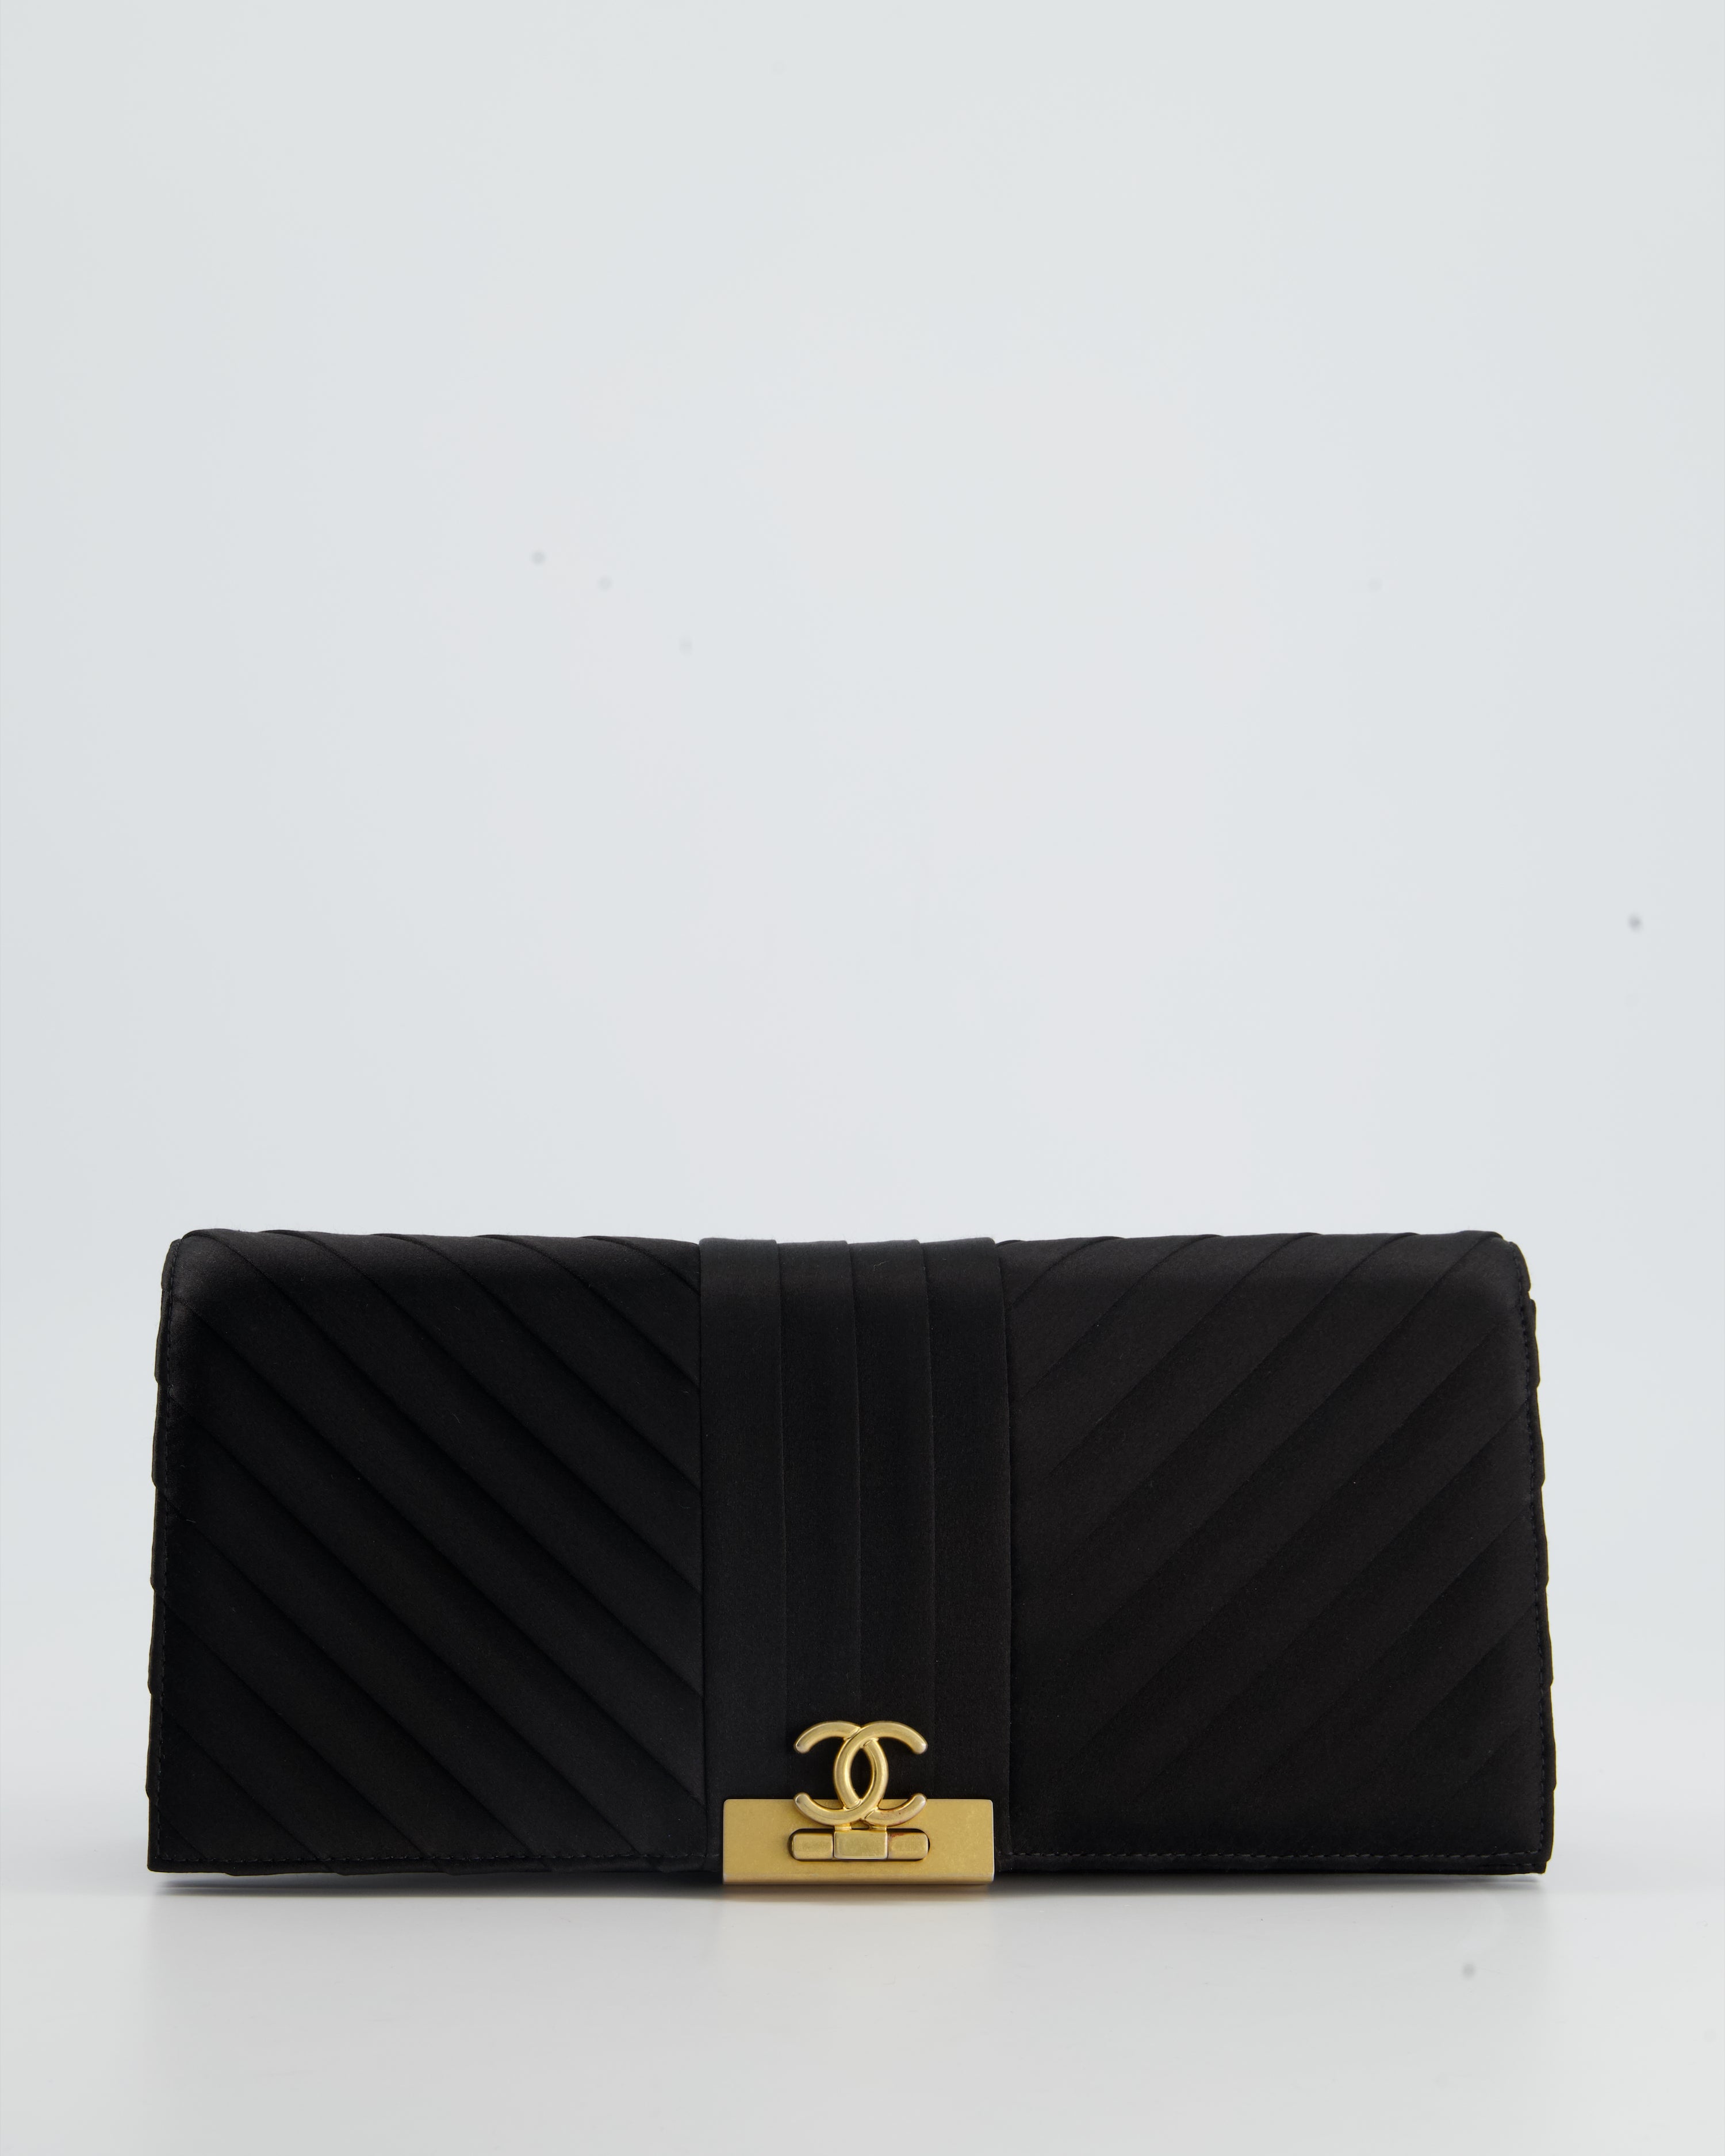 Genuine Leather Mini Square Flap Bag: Upgrade Mirror Quality, Quilted,  Caviar Lambskin, Designer Black Shoulder Purse With Gold Chain From  Mooyoung888, $144.04 | DHgate.Com